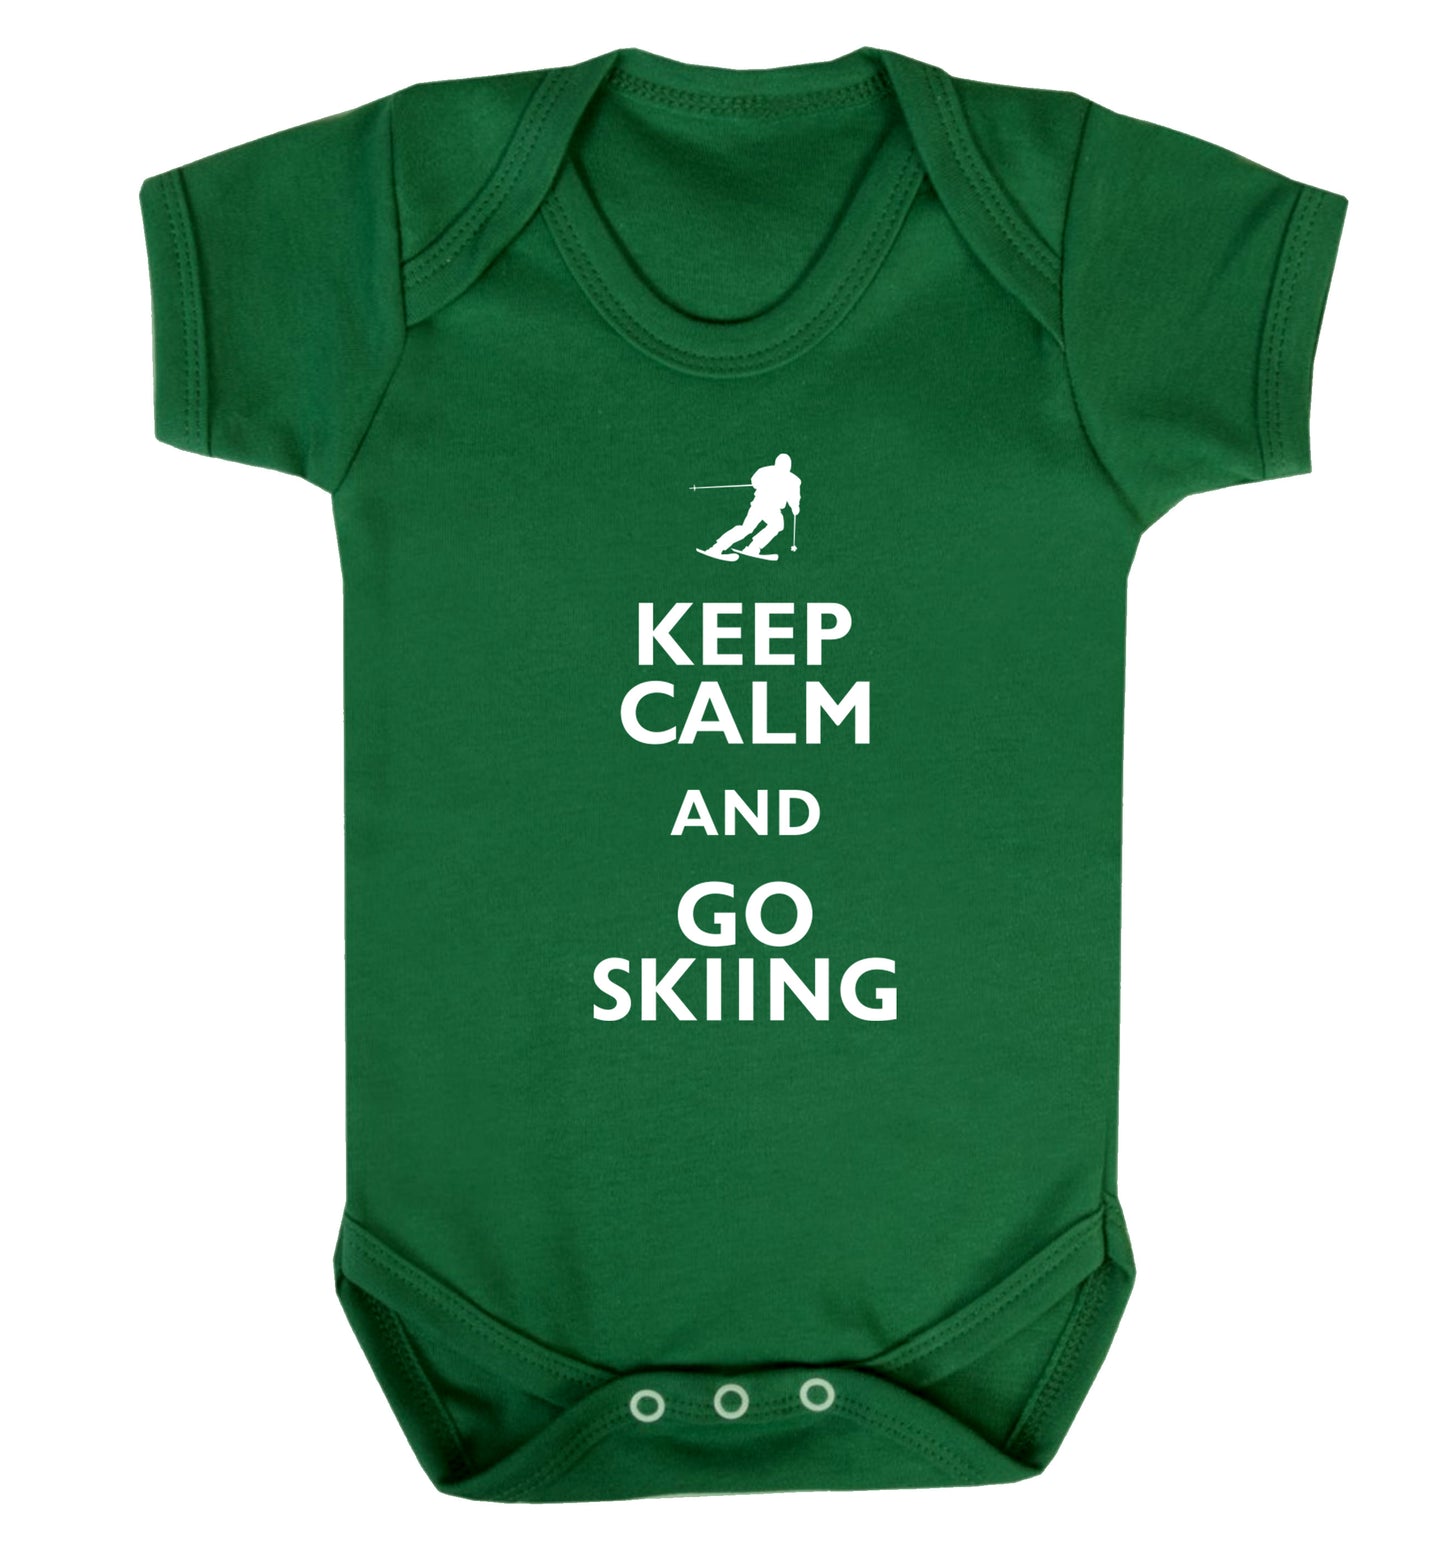 Keep calm and go skiing Baby Vest green 18-24 months